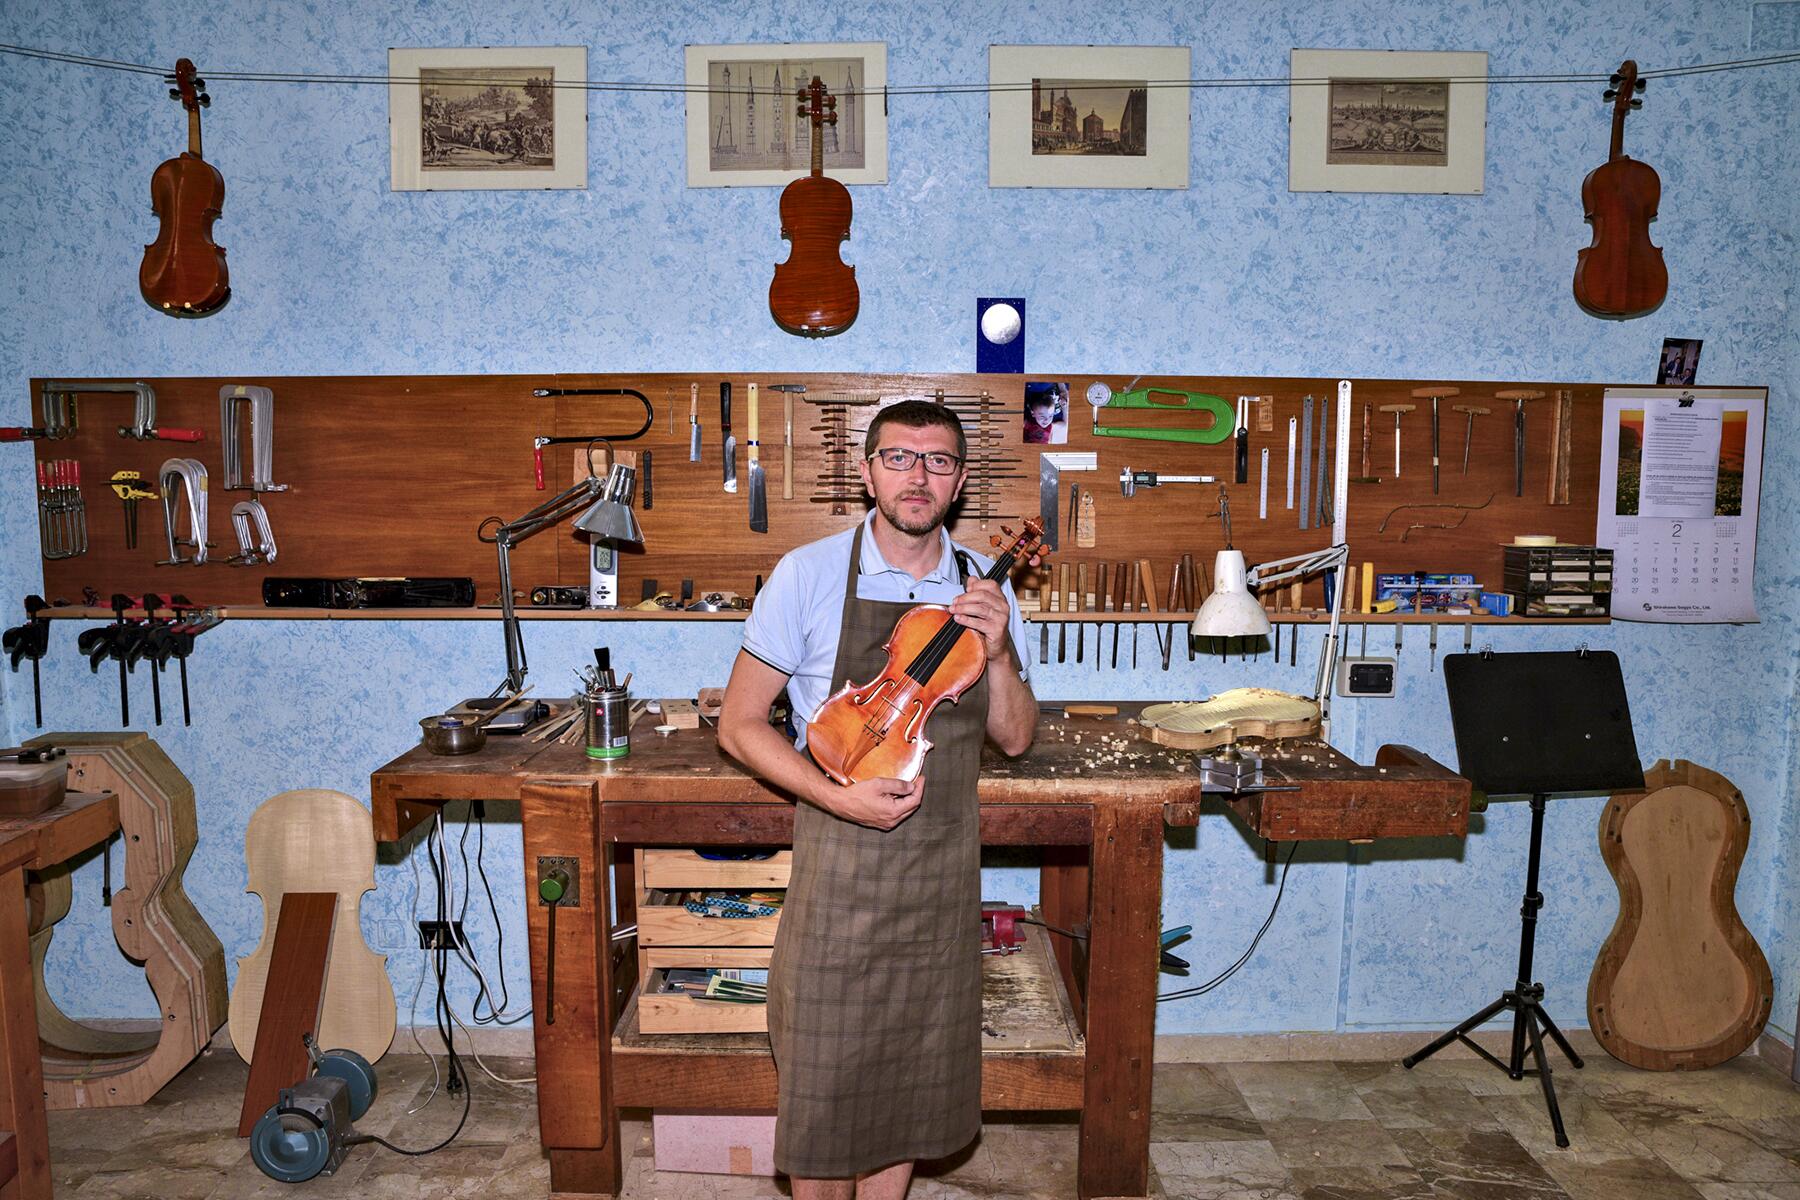 Cremona is now renowned for its handmade violin makers